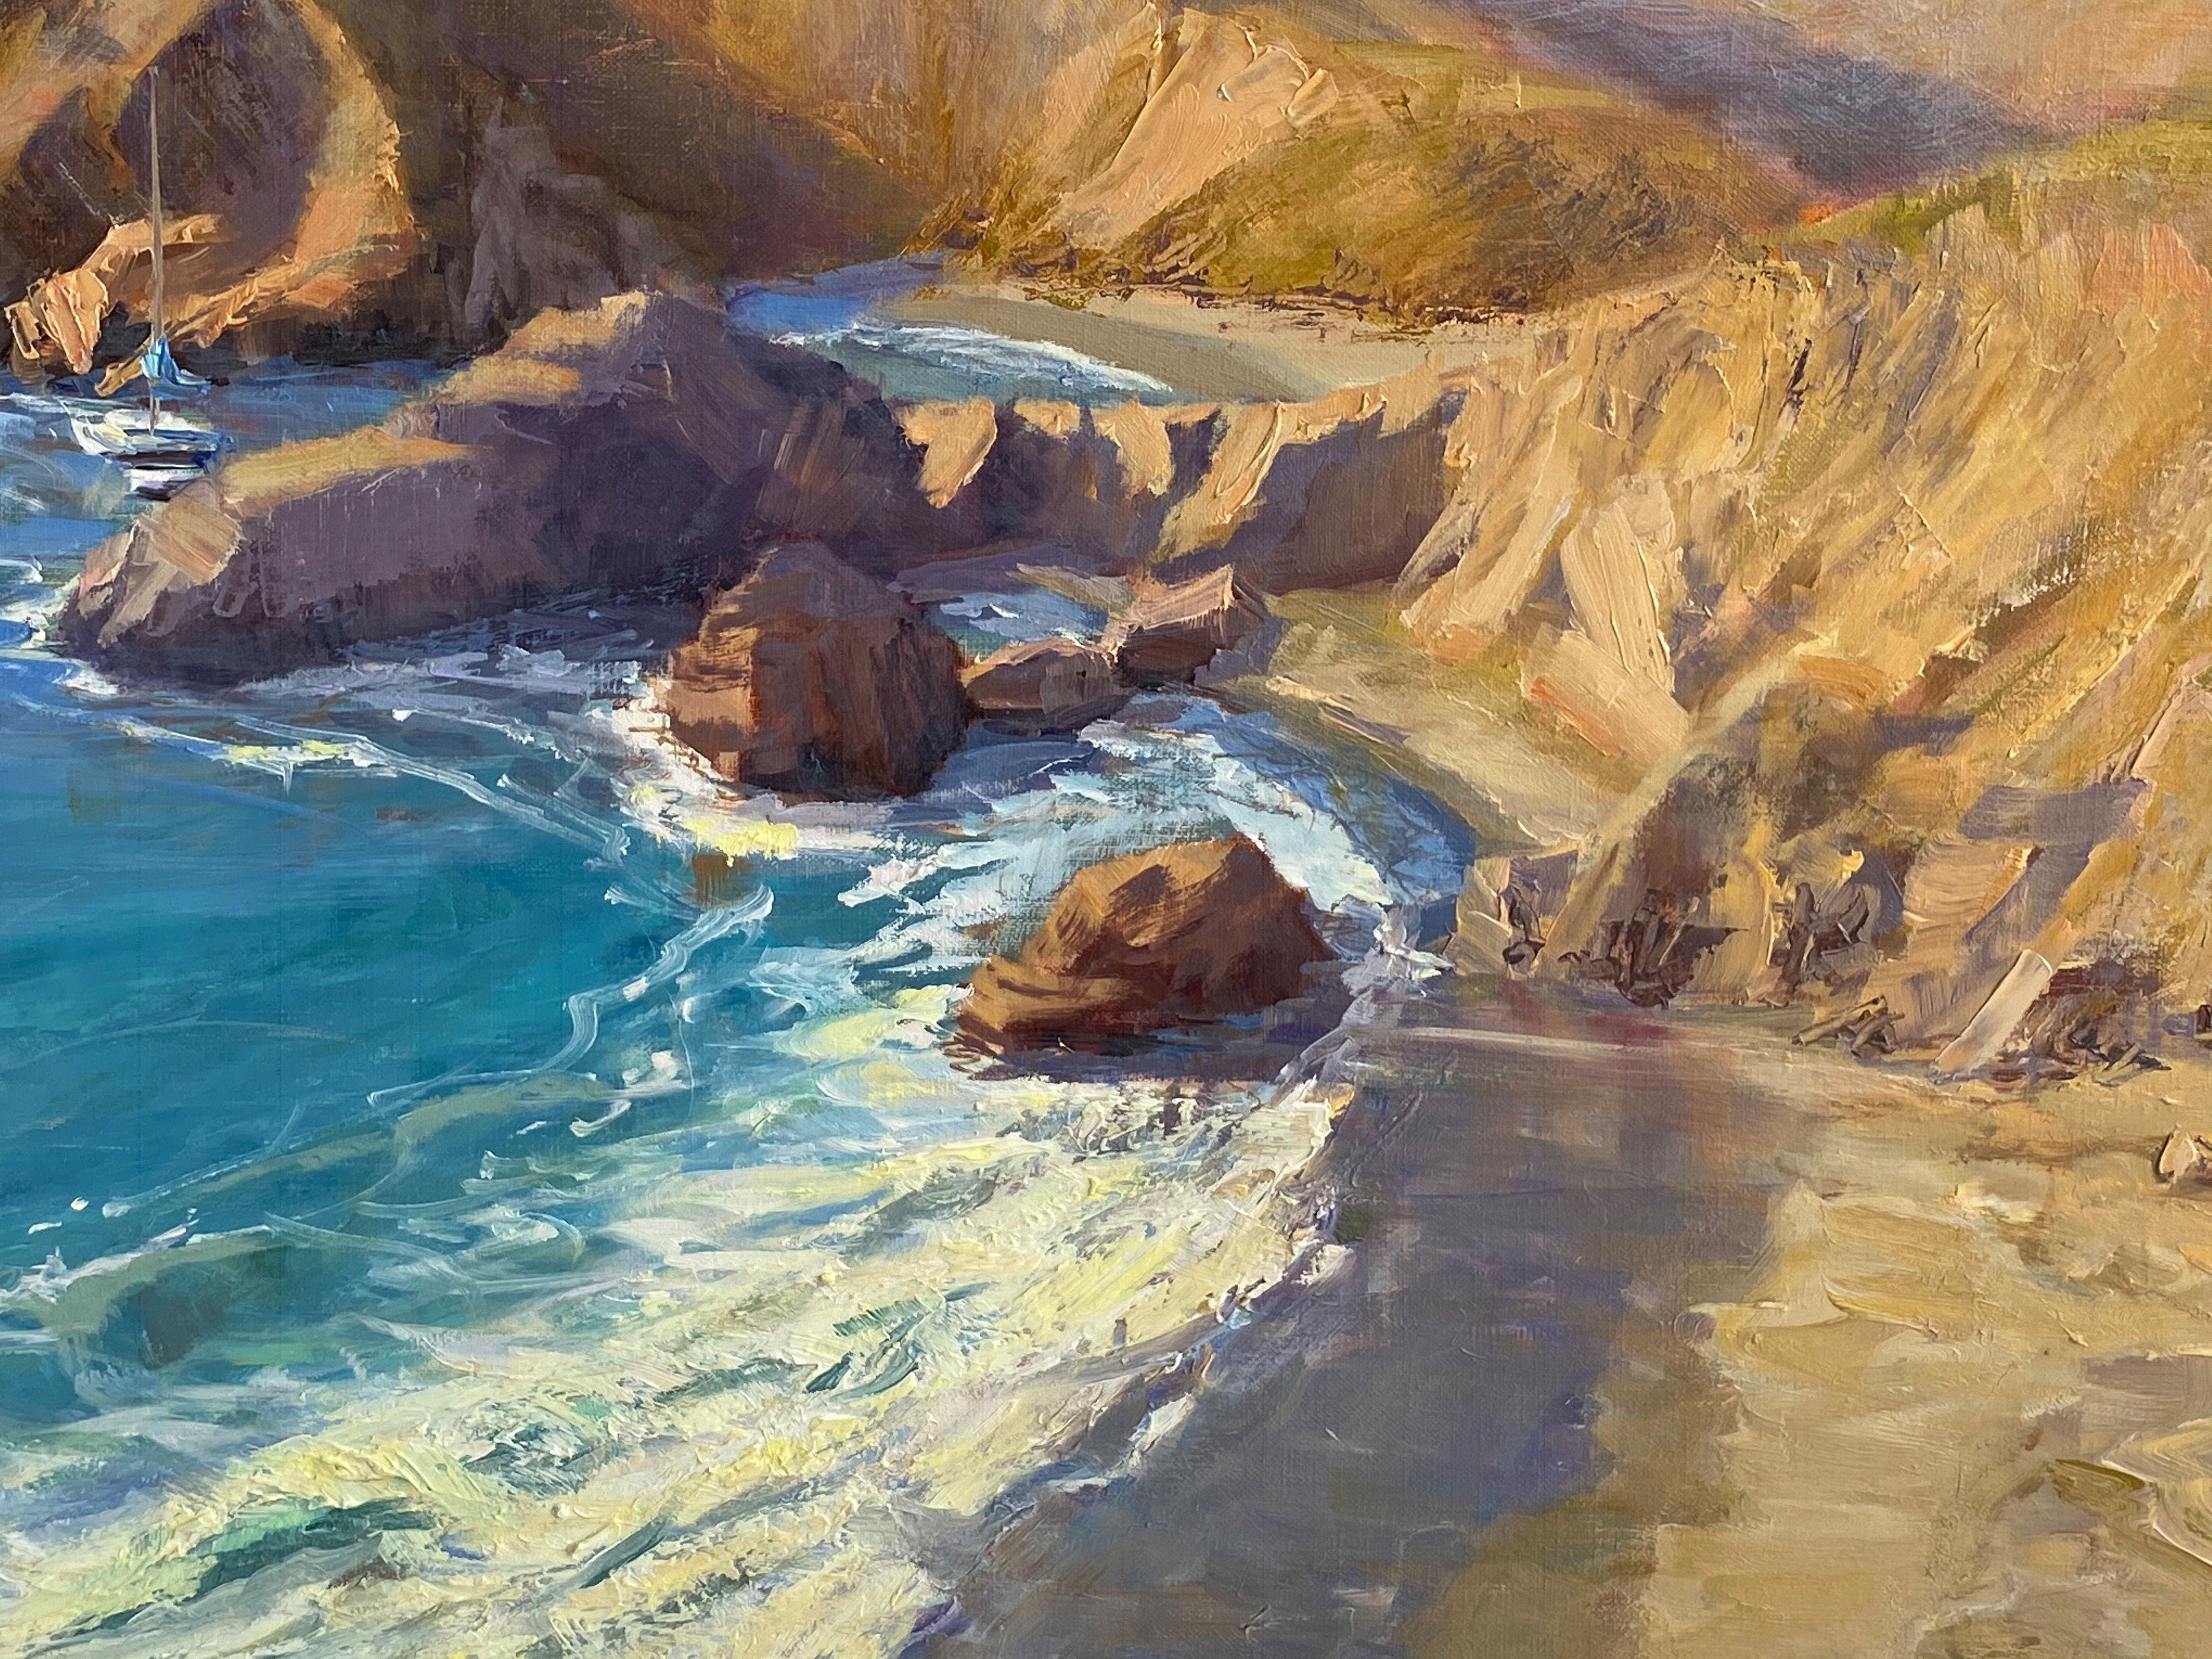 Santa Catalina Island in Southern California offers great camping, hiking, horseback riding, mountain biking and jeep eco-tours in a protected wilderness. I discovered that it also offers an incredible setting for painting, reflecting the